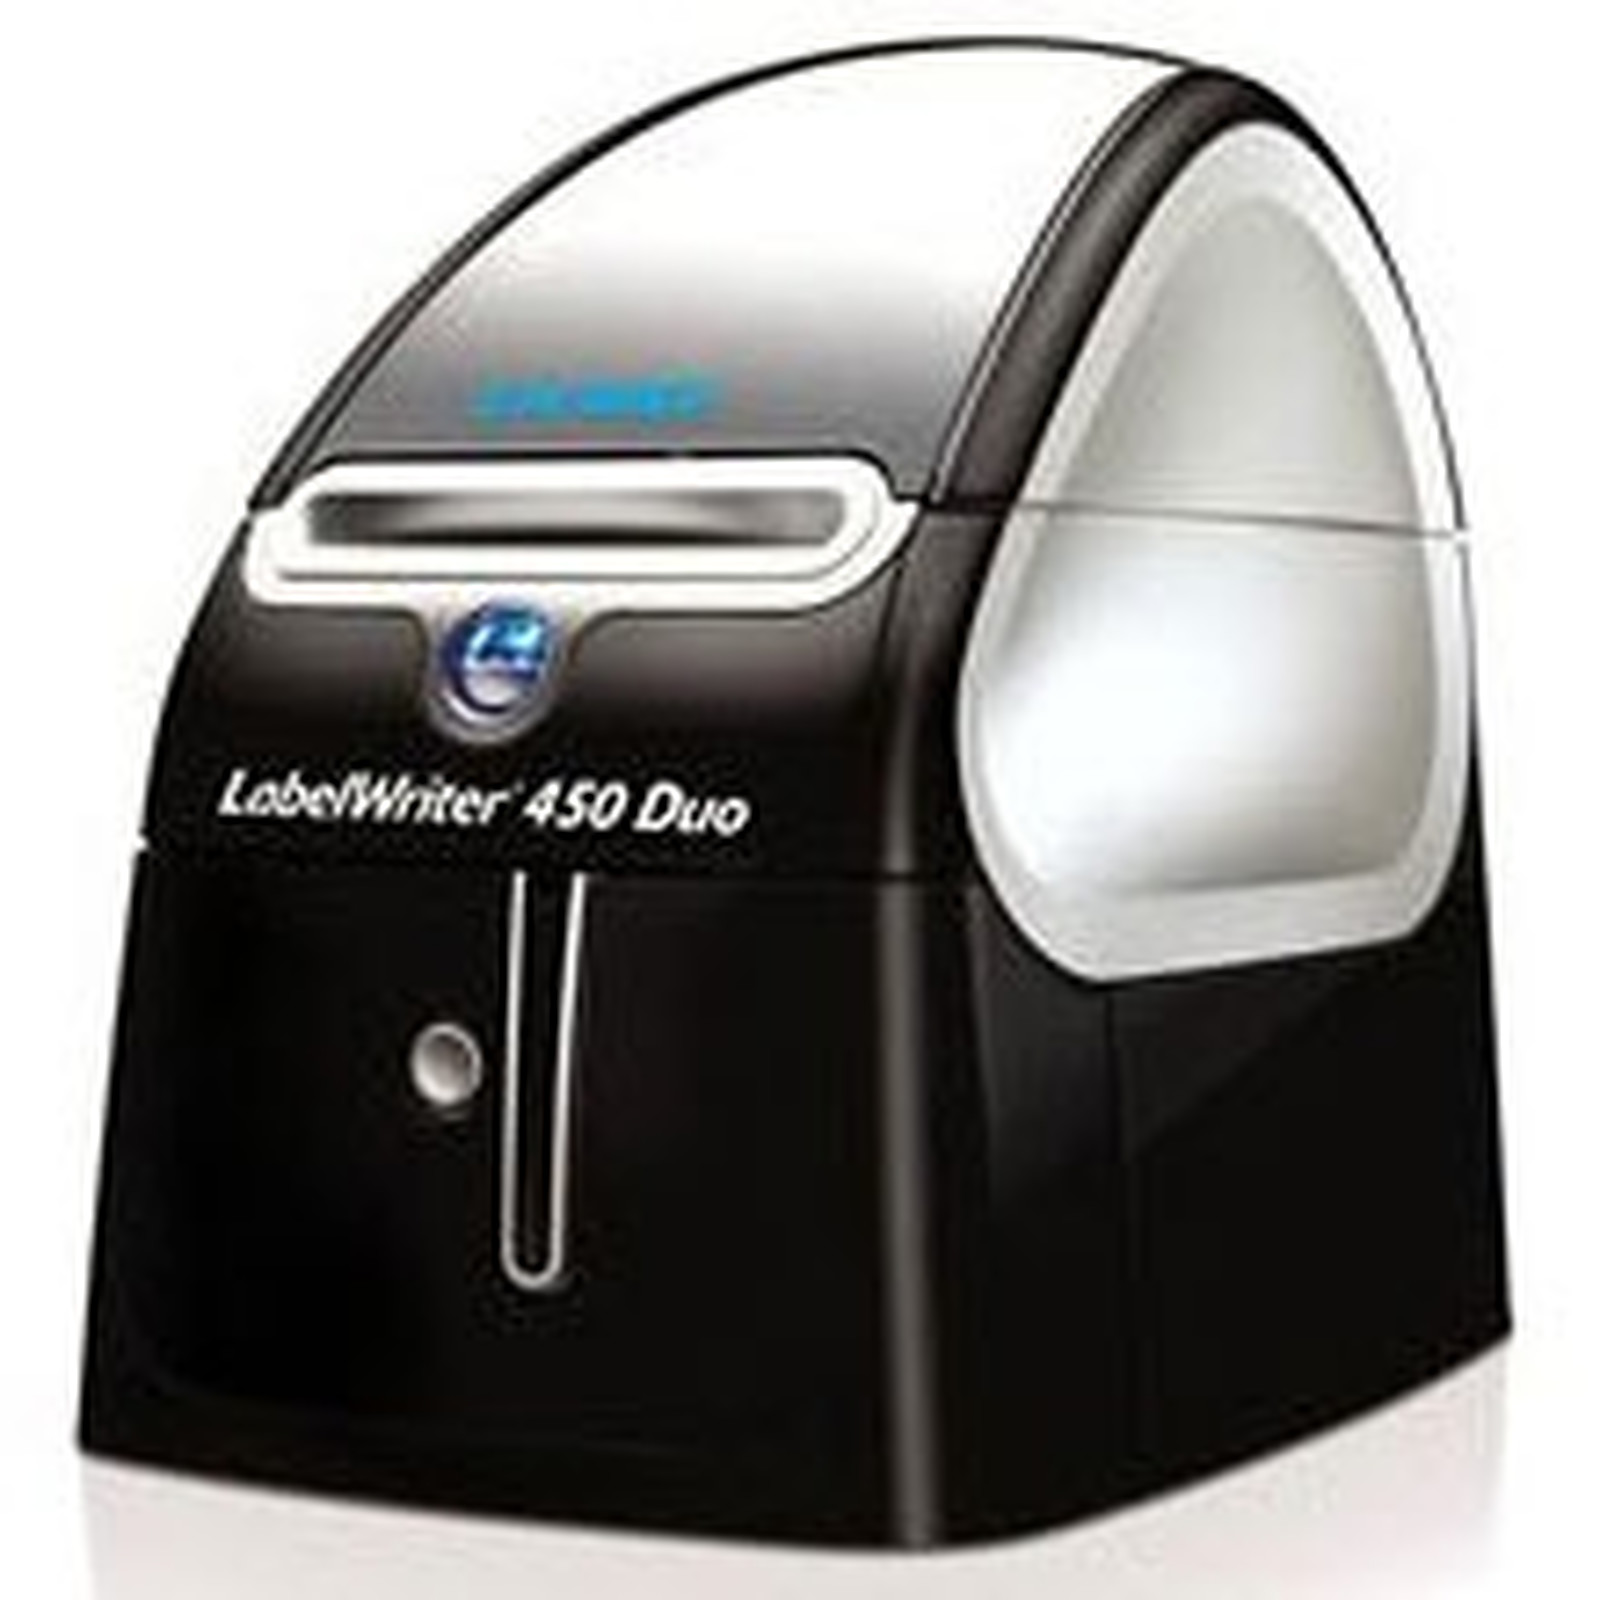 DYMO LabelWriter 450 Duo - Imprimante thermique DYMO